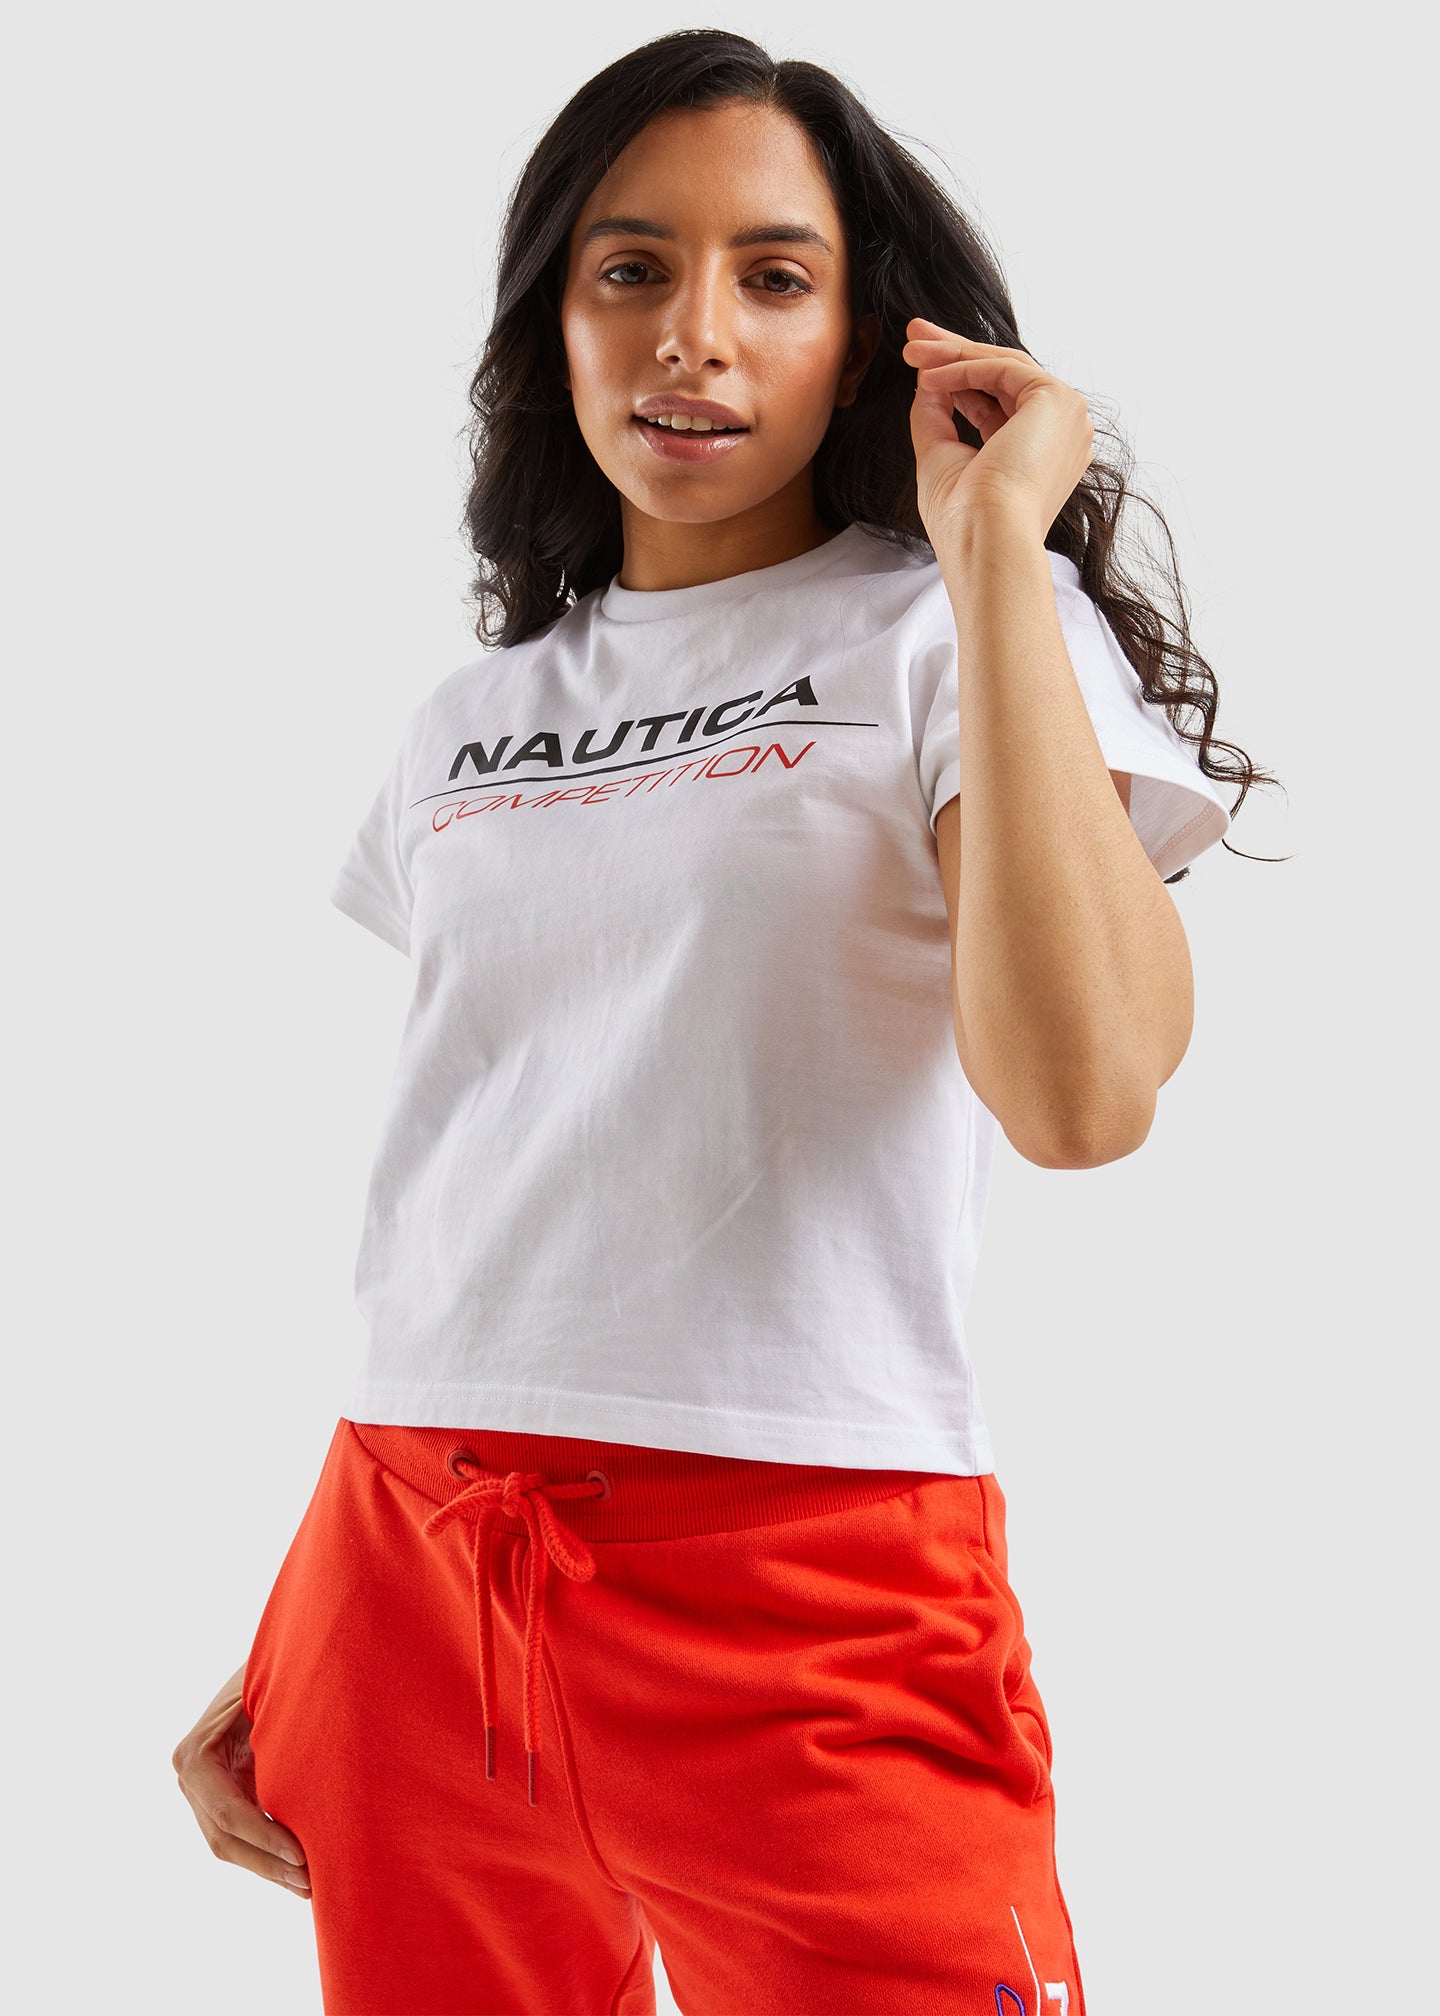 Nautica Competition Womens Clothes & Clothing